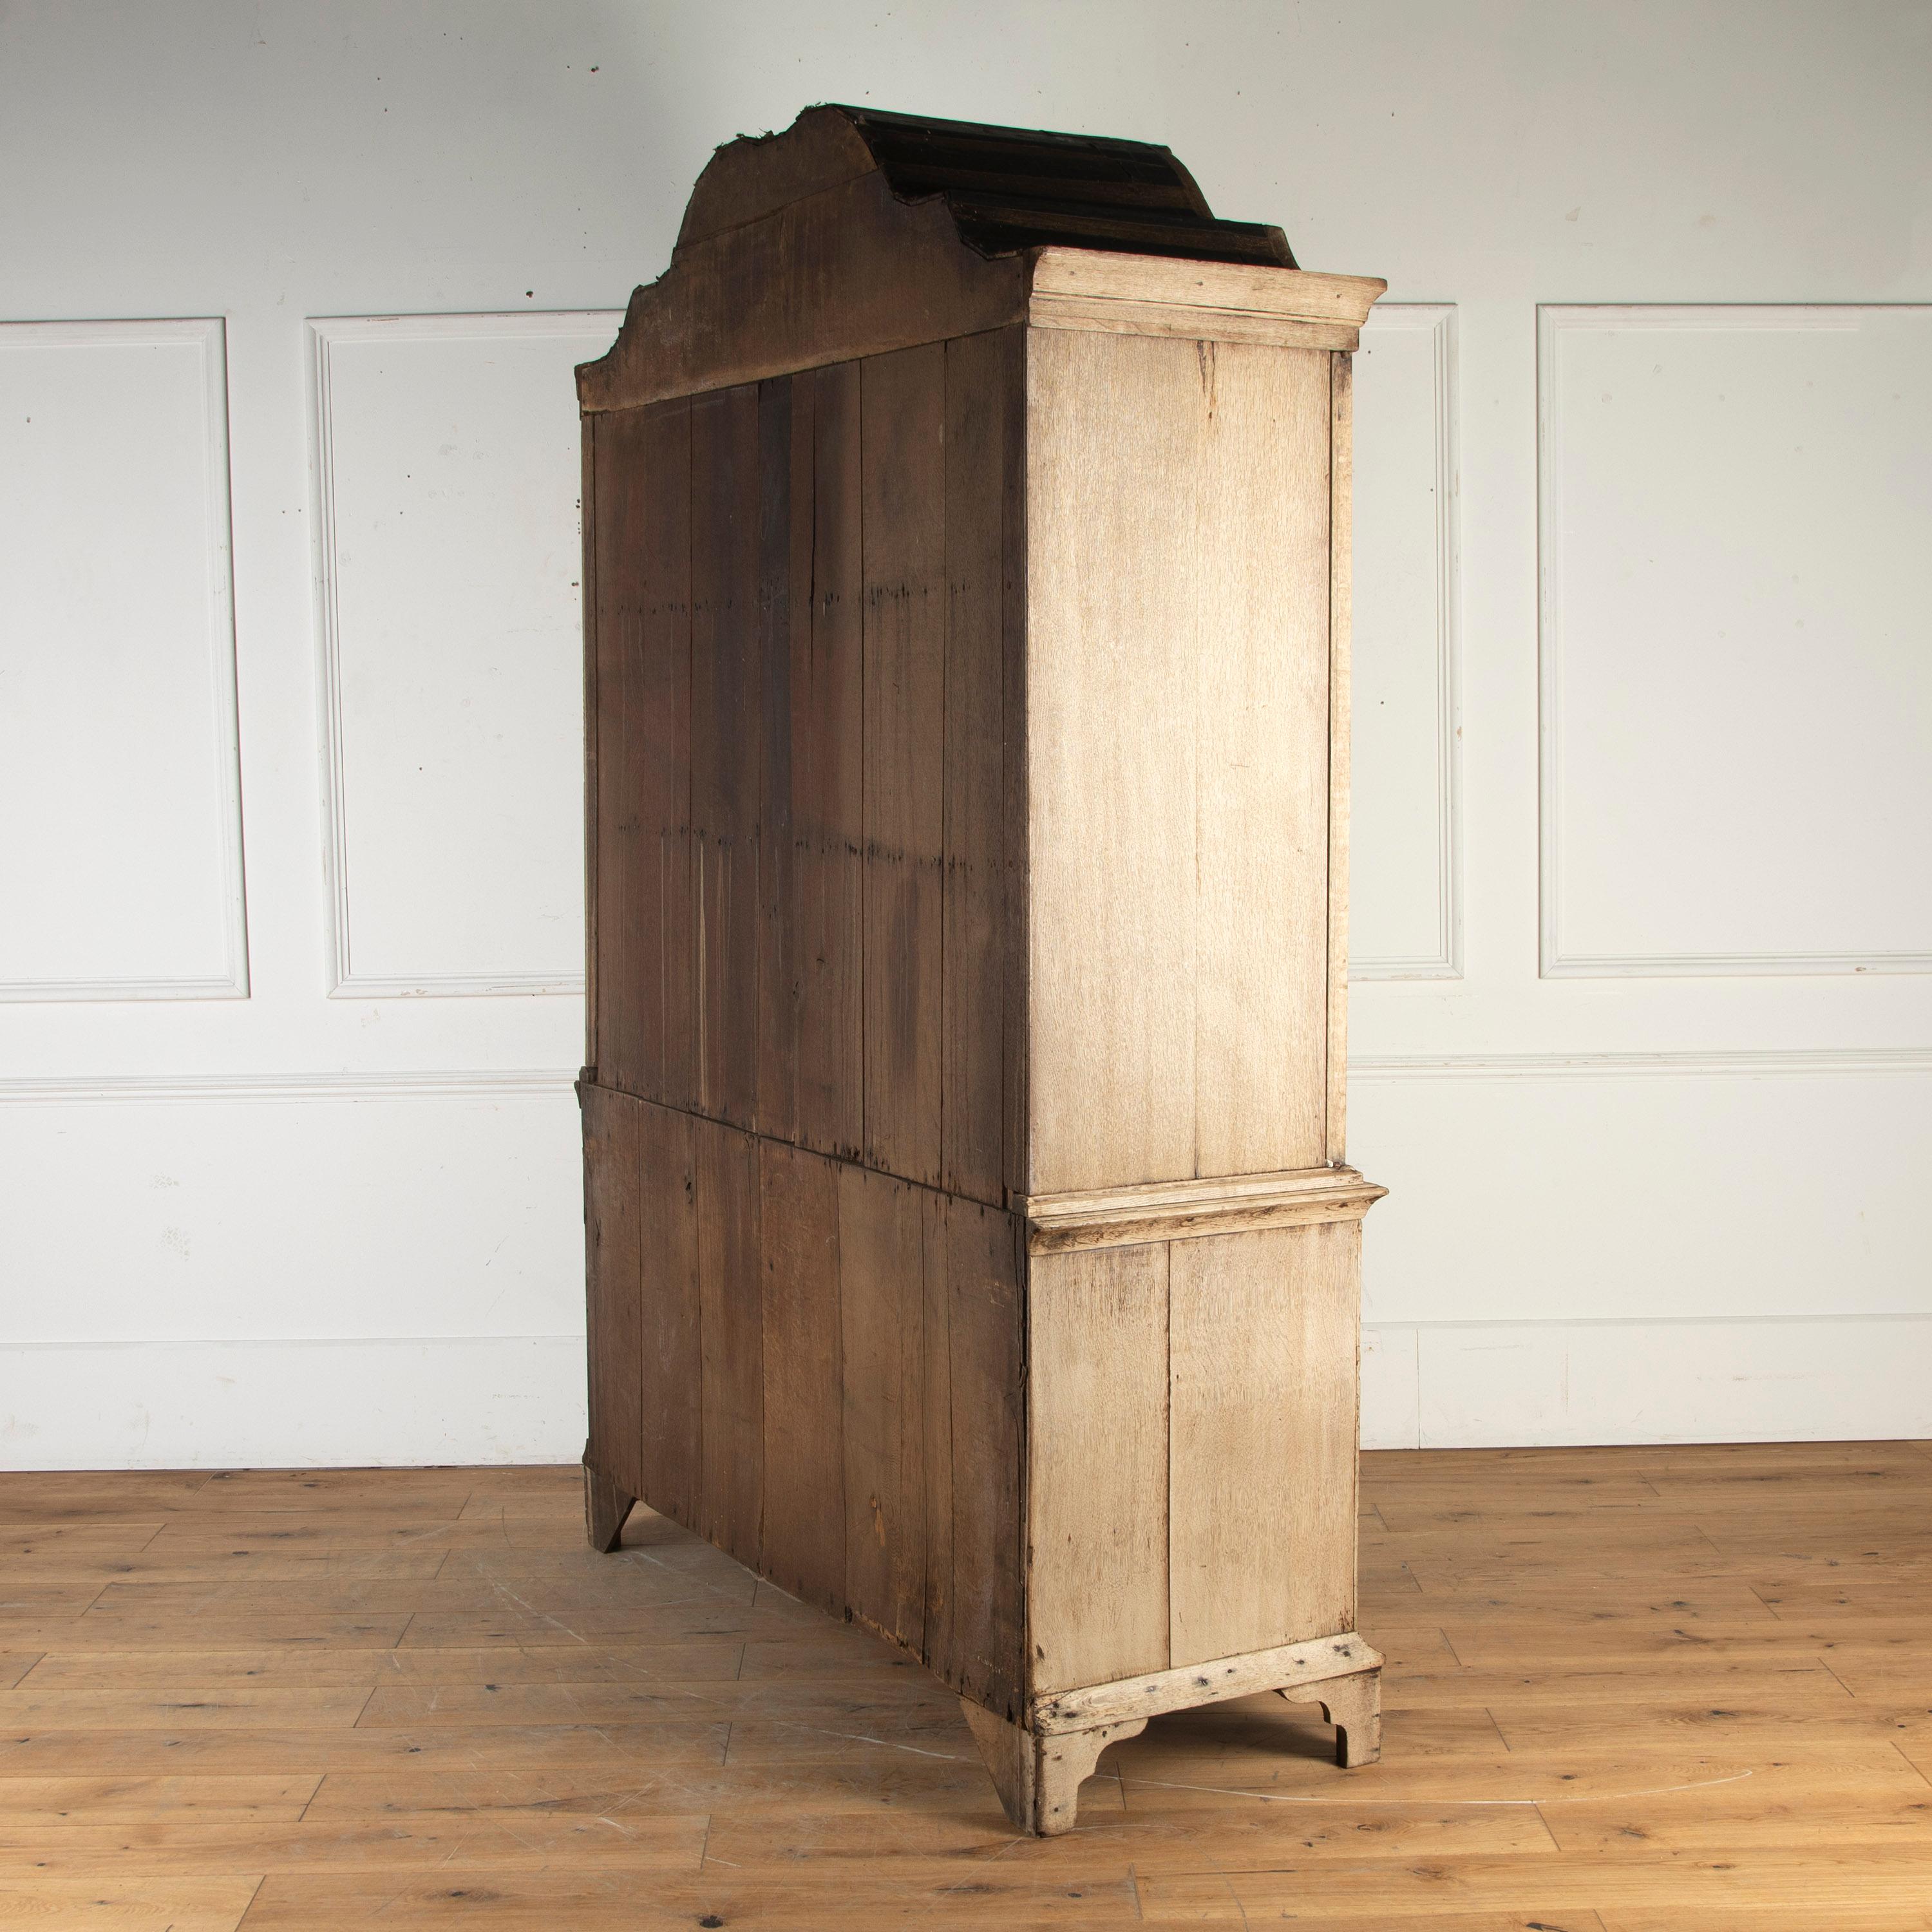 Beautiful 19th century Dutch bleached oak cupboard.

Featuring a lovely scalloped top and plenty of storage including shelving, drawers and three small inner drawers.

The piece separates into two parts for easy moving and is a gorgeous piece of